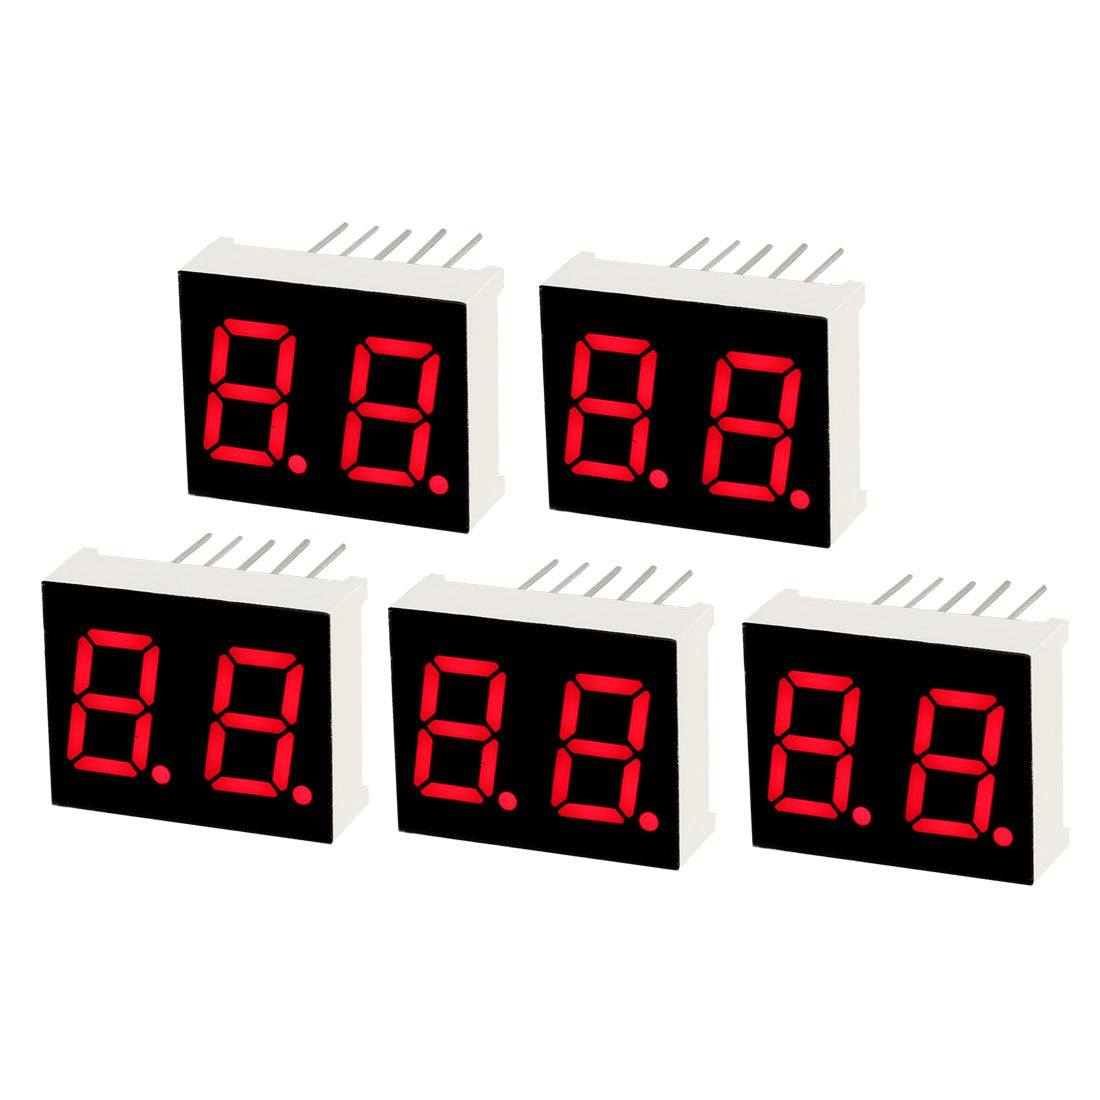 uxcell Uxcell Common Cathode 10 Pin 2 Bit 7 Segment 0.79 x 0.63 x 0.28 Inch 0.4" Red LED Display Digital Tube 5pcs